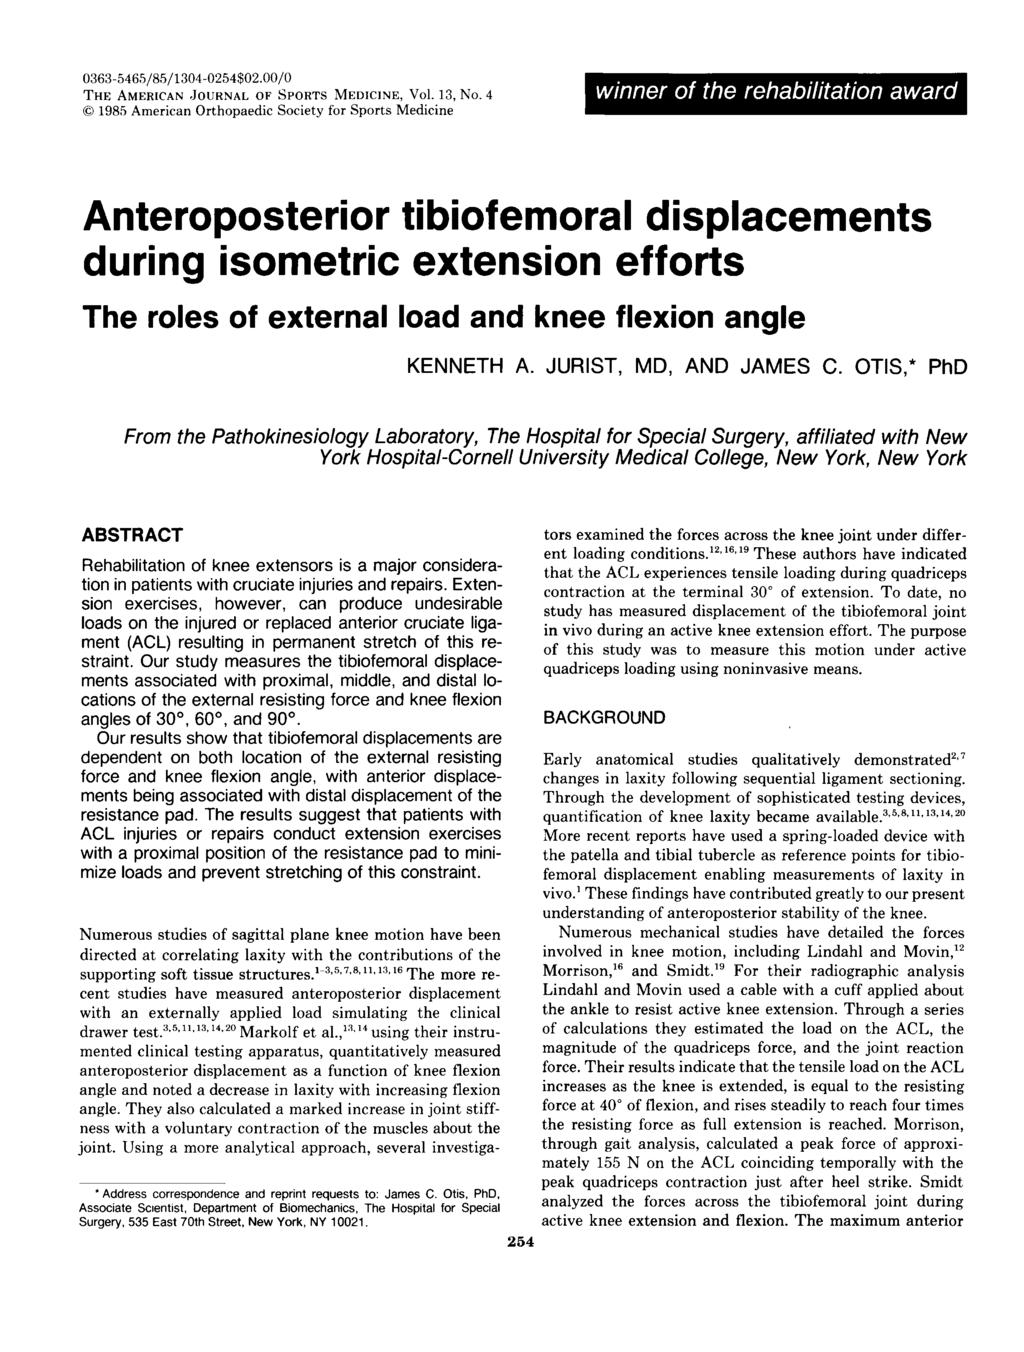 winner of the rehabilitation award Anteroposterior tibiofemoral displacements during isometric extension efforts The roles of external load and knee flexion angle KENNETH A. JURIST, MD, AND JAMES C.